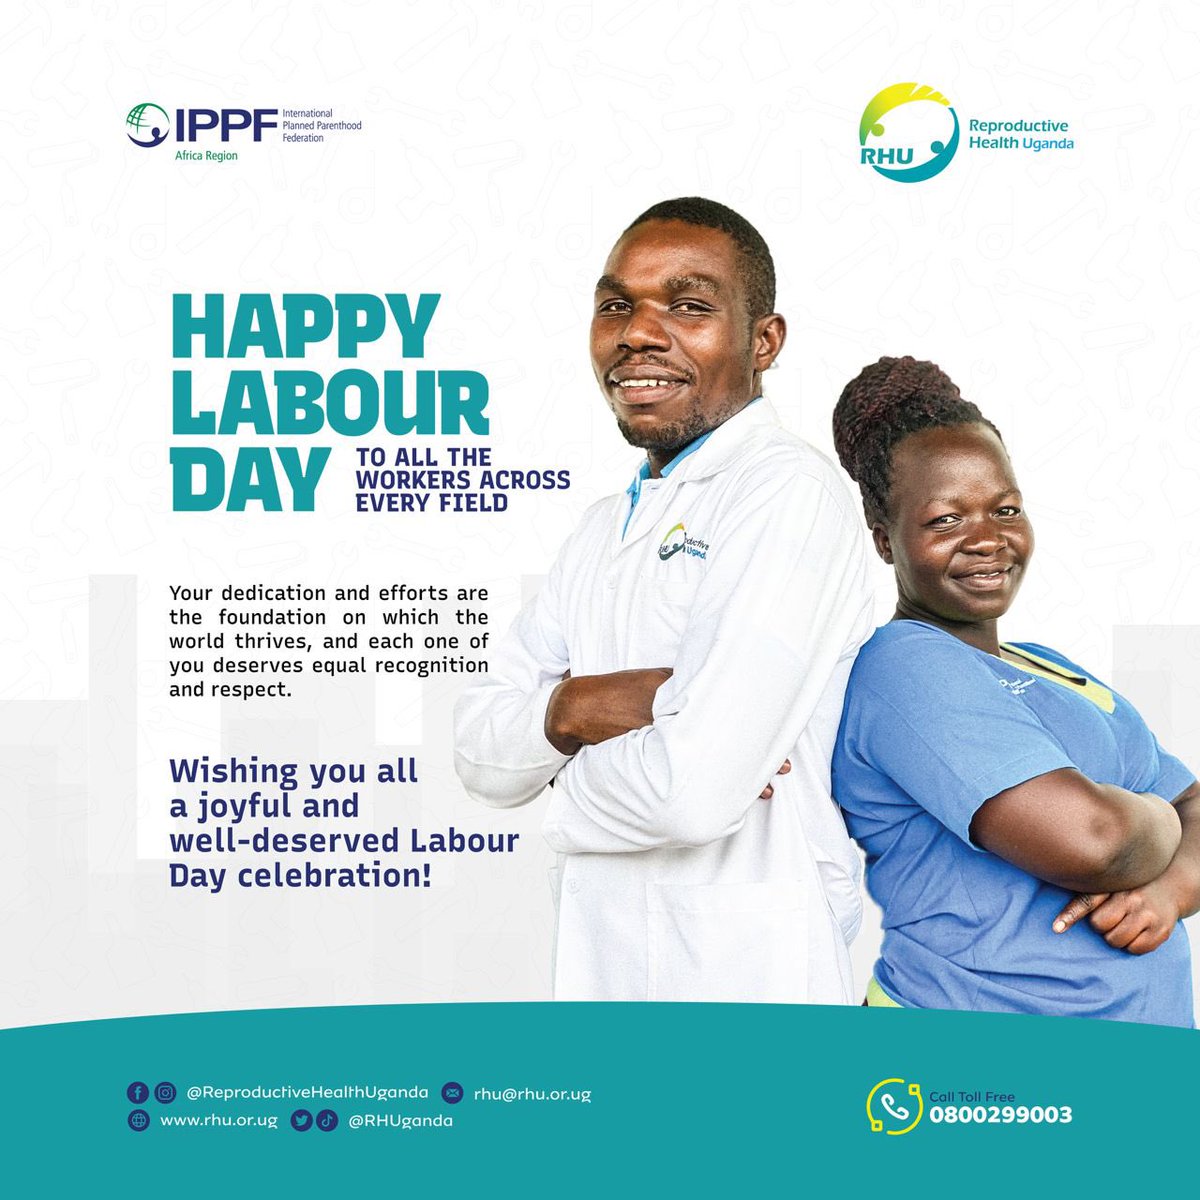 Happy #LabourDay2024 to all the hardworking individuals who contribute their skills and dedication to make our communities better! Your efforts are the cornerstone of progress and success. Wishing you all a well-deserved day of celebration and recognition. #WeAreRHU